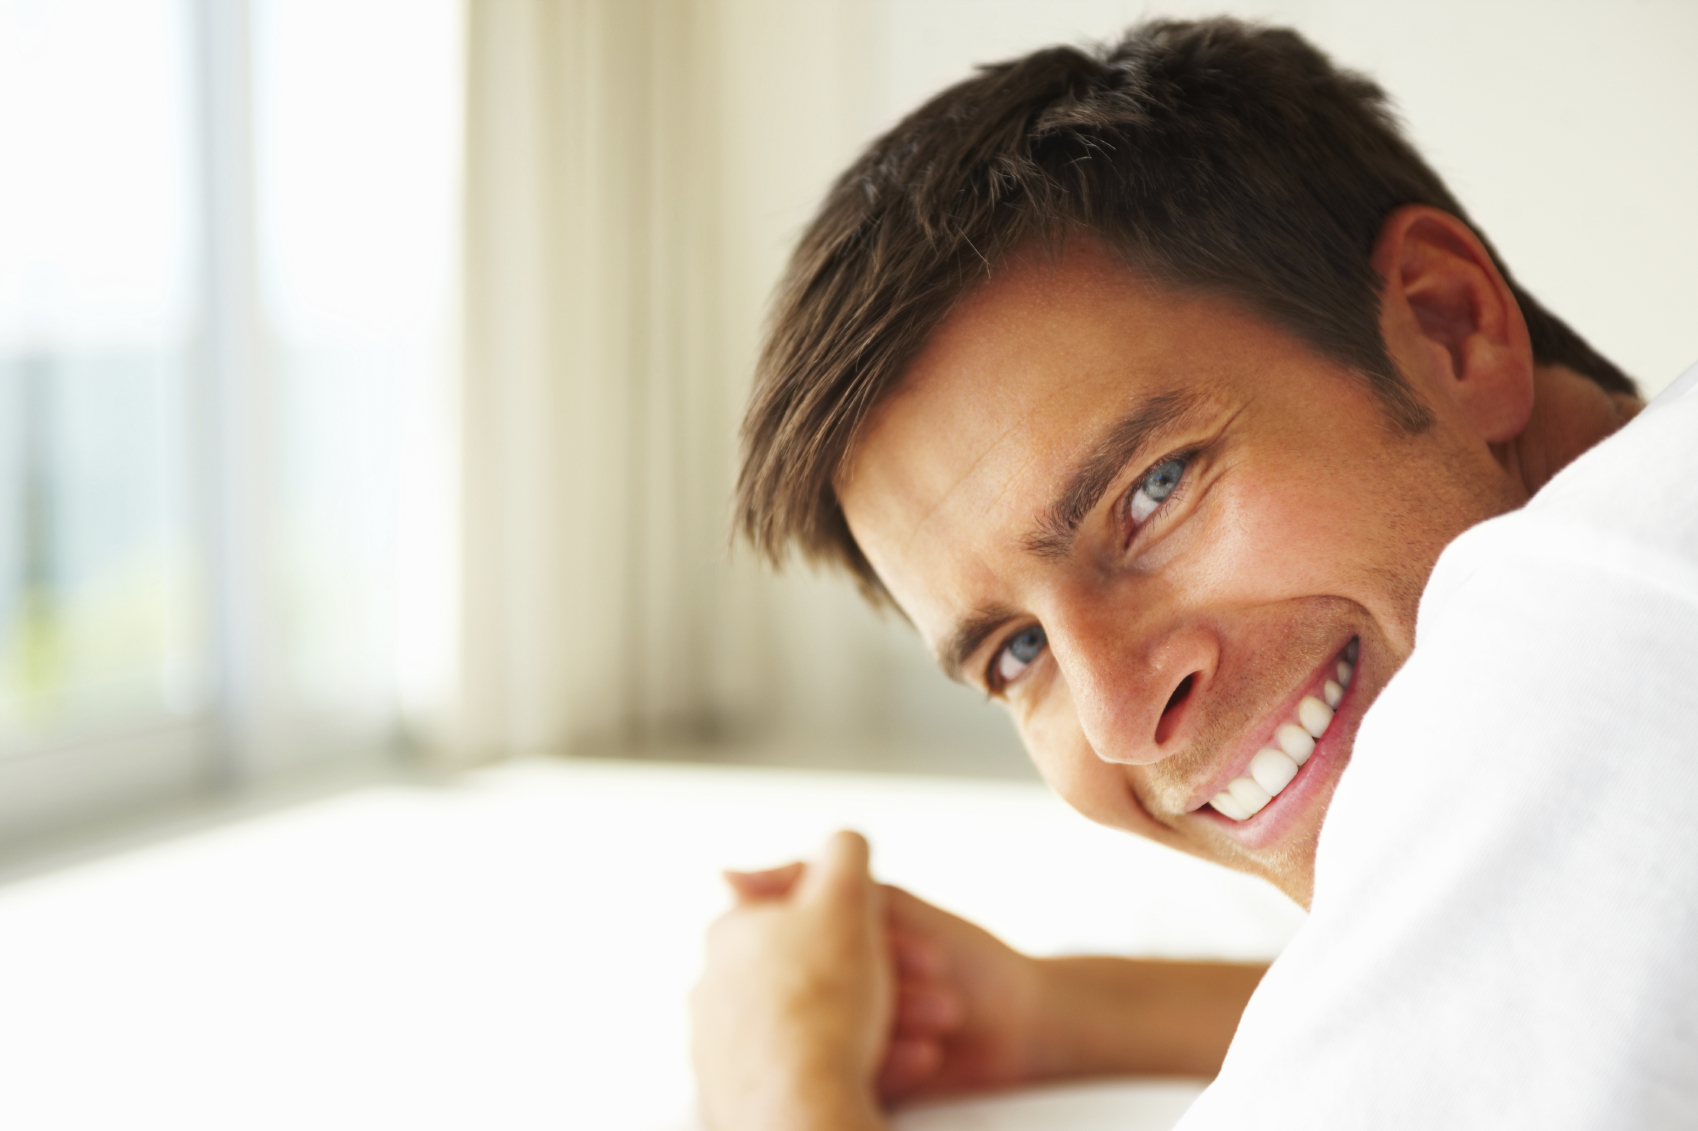 man smiling with dental crowns